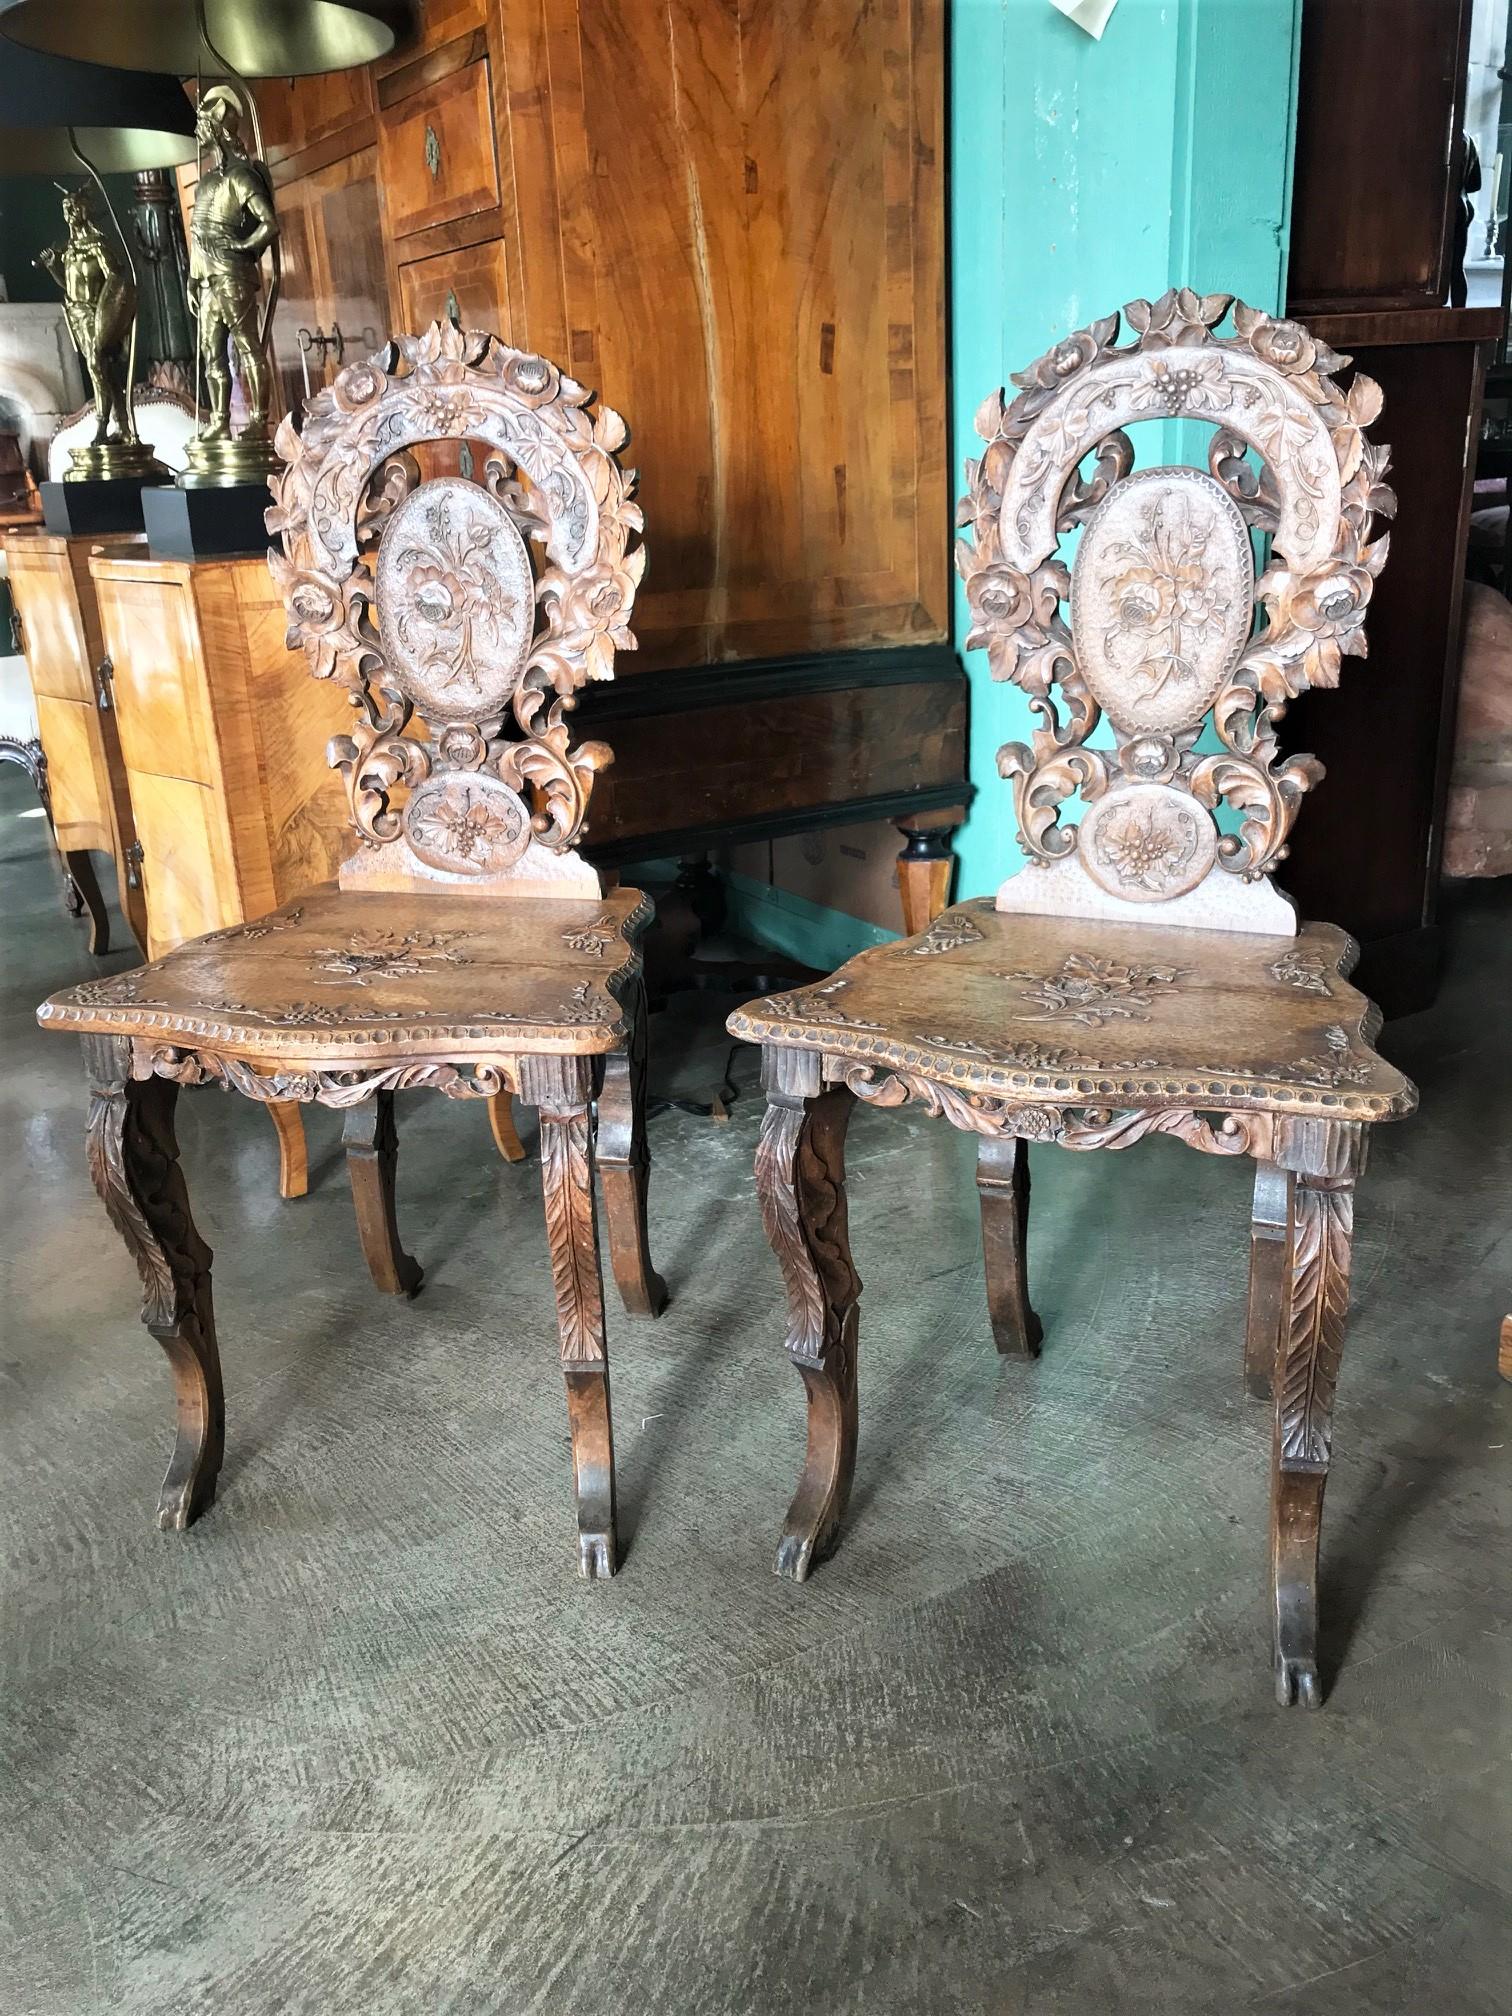 Pair of rustic 19th century Tyrol Sgabello Alpine stool with back side chairs escabelle
Part of the Folk Art The Tyrol is an entirely Alpine region that includes parts of both Italy Austria and Swiss Alps These are BIG Mountains and so before the